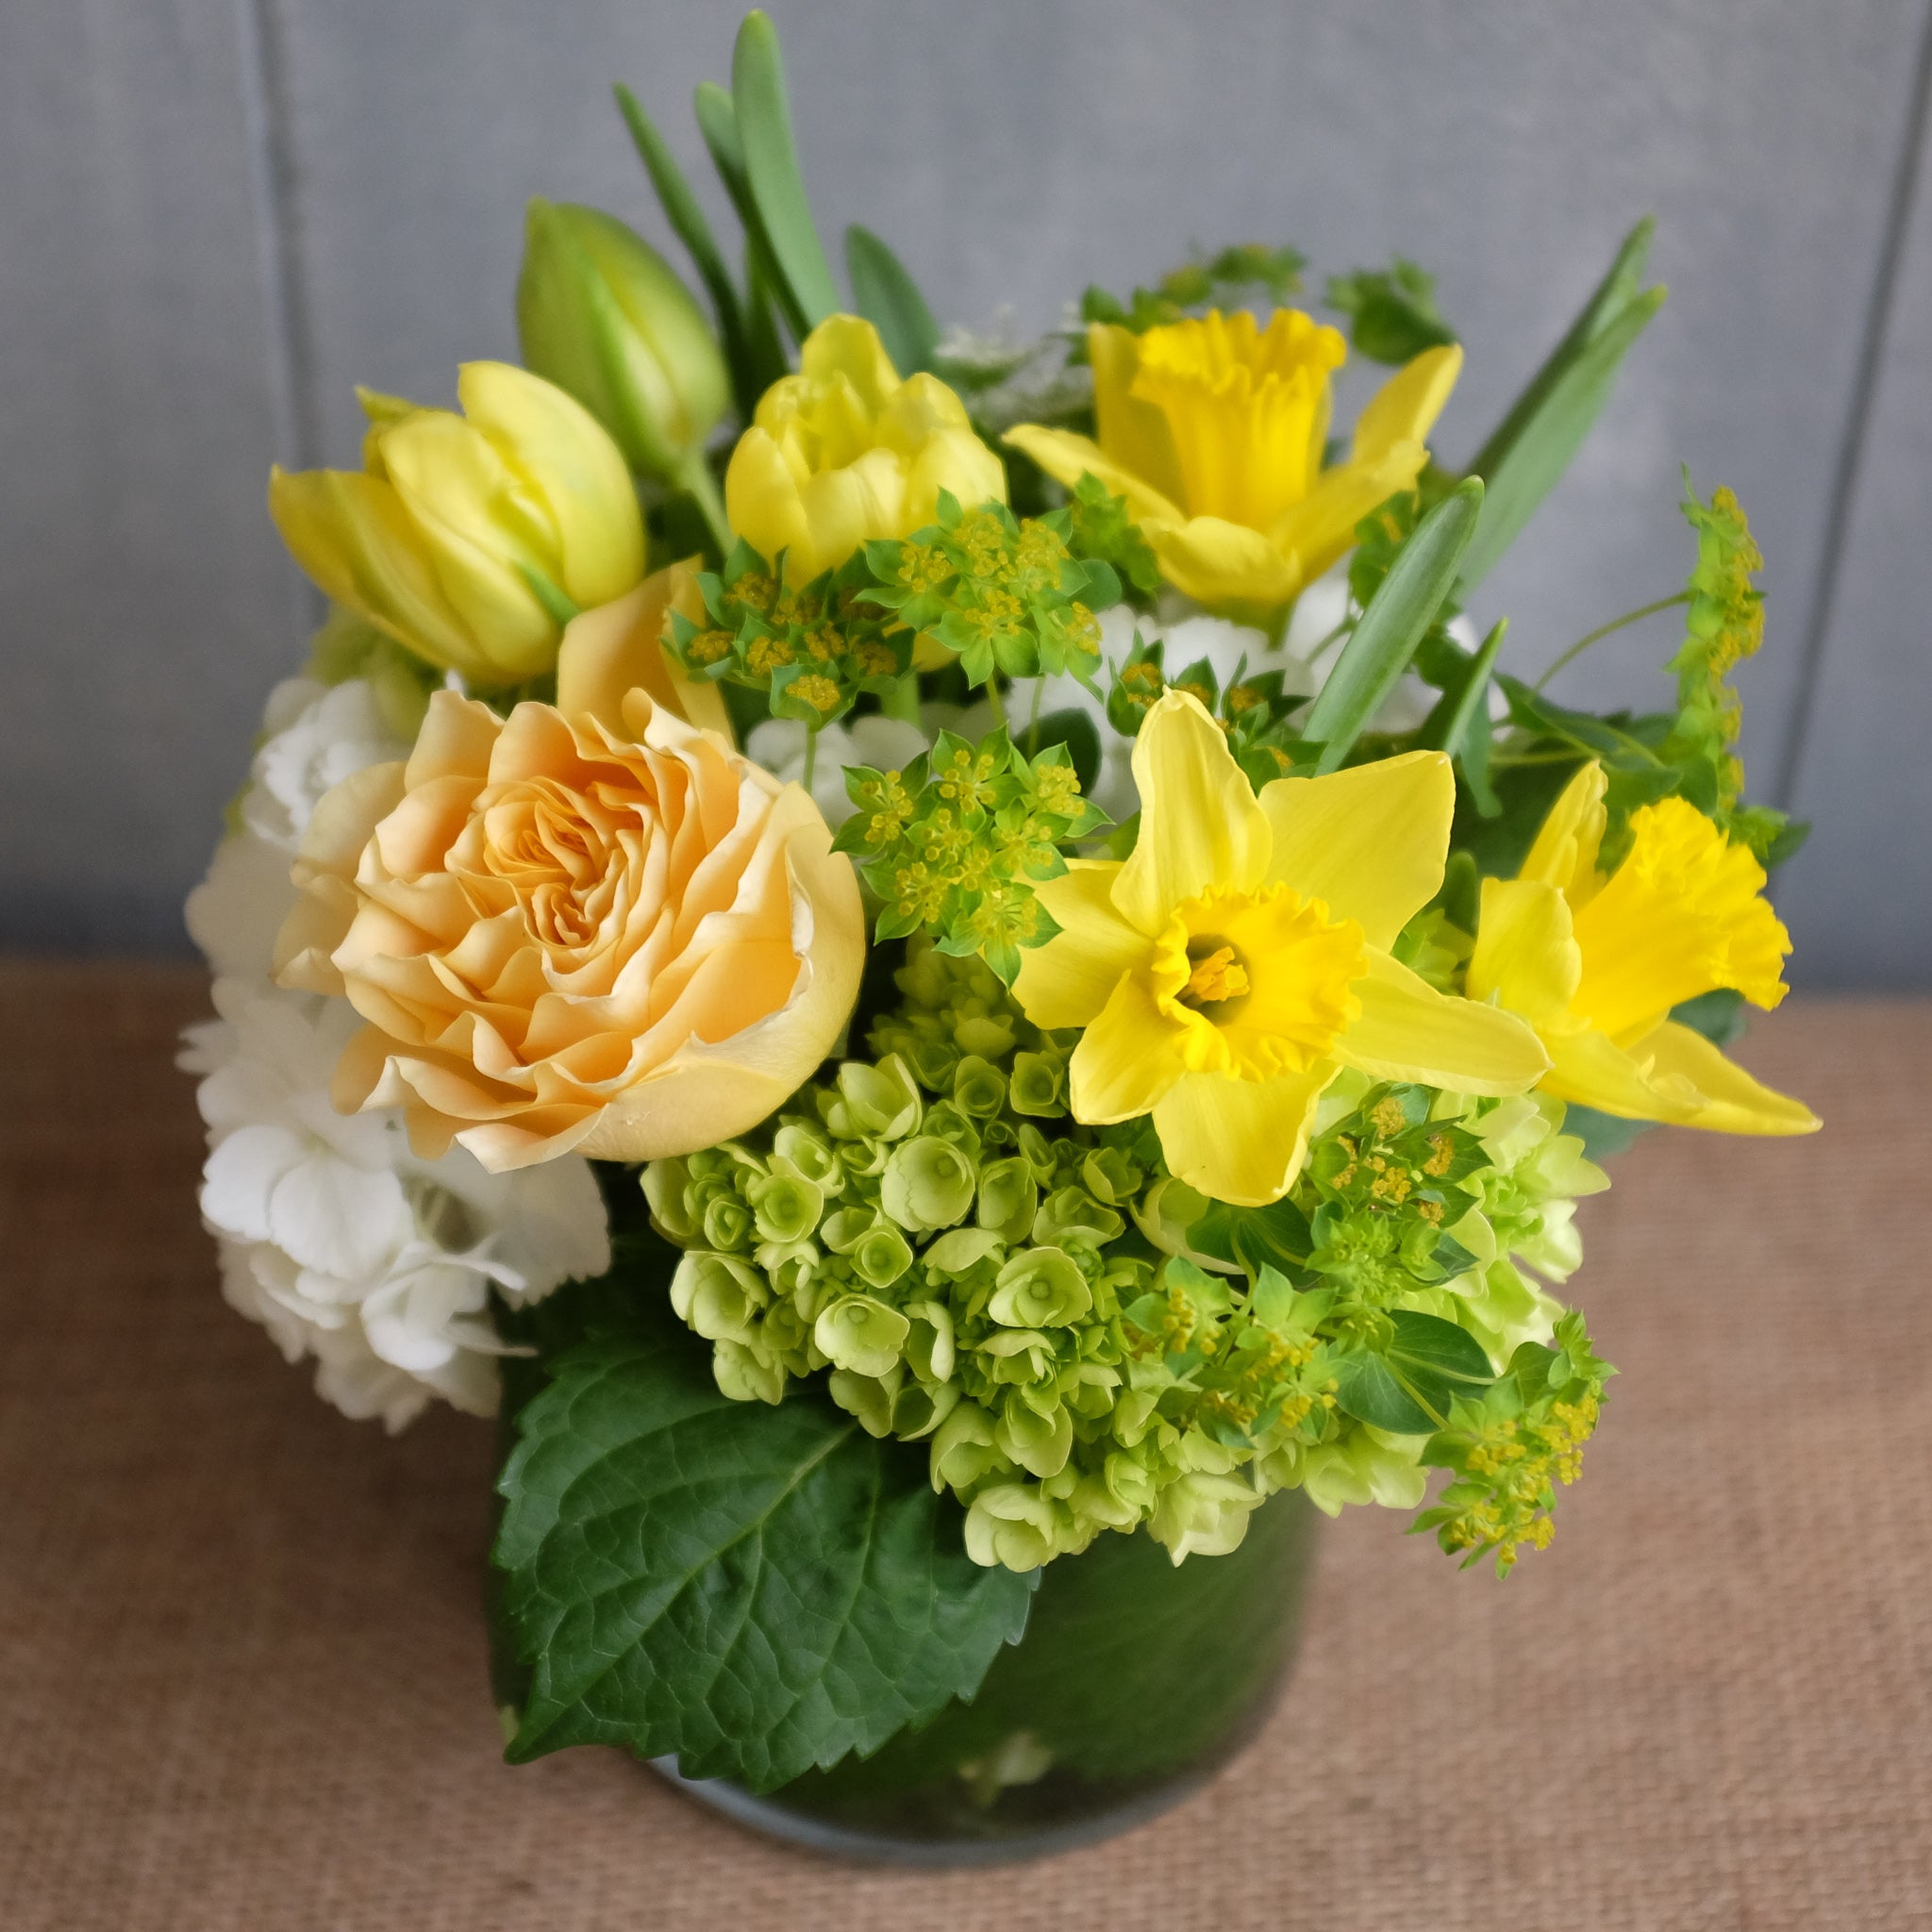 Sunny yellowfins white and green spring bouquet by Michler Florist, Lexington KY.